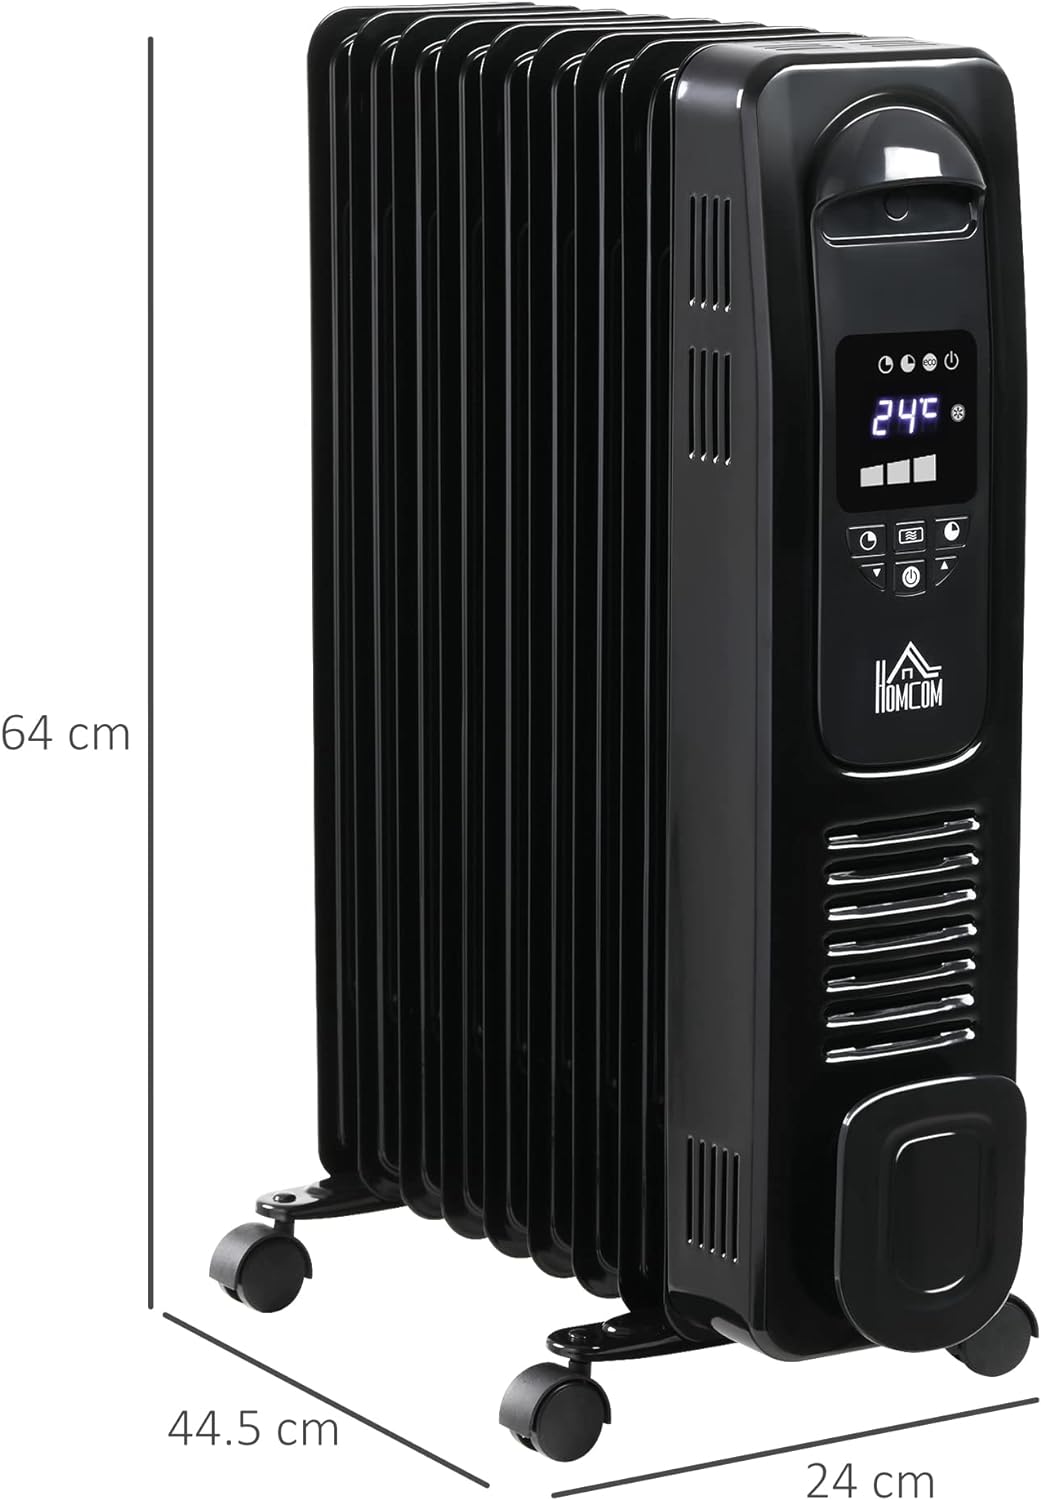 Maplin Plus 2180W Digital 9 Fin Portable Electric Oil Filled Radiator with LED Display, Timer, 3 Heat Settings, Safety Cut-Off & Remote Control - maplin.co.uk